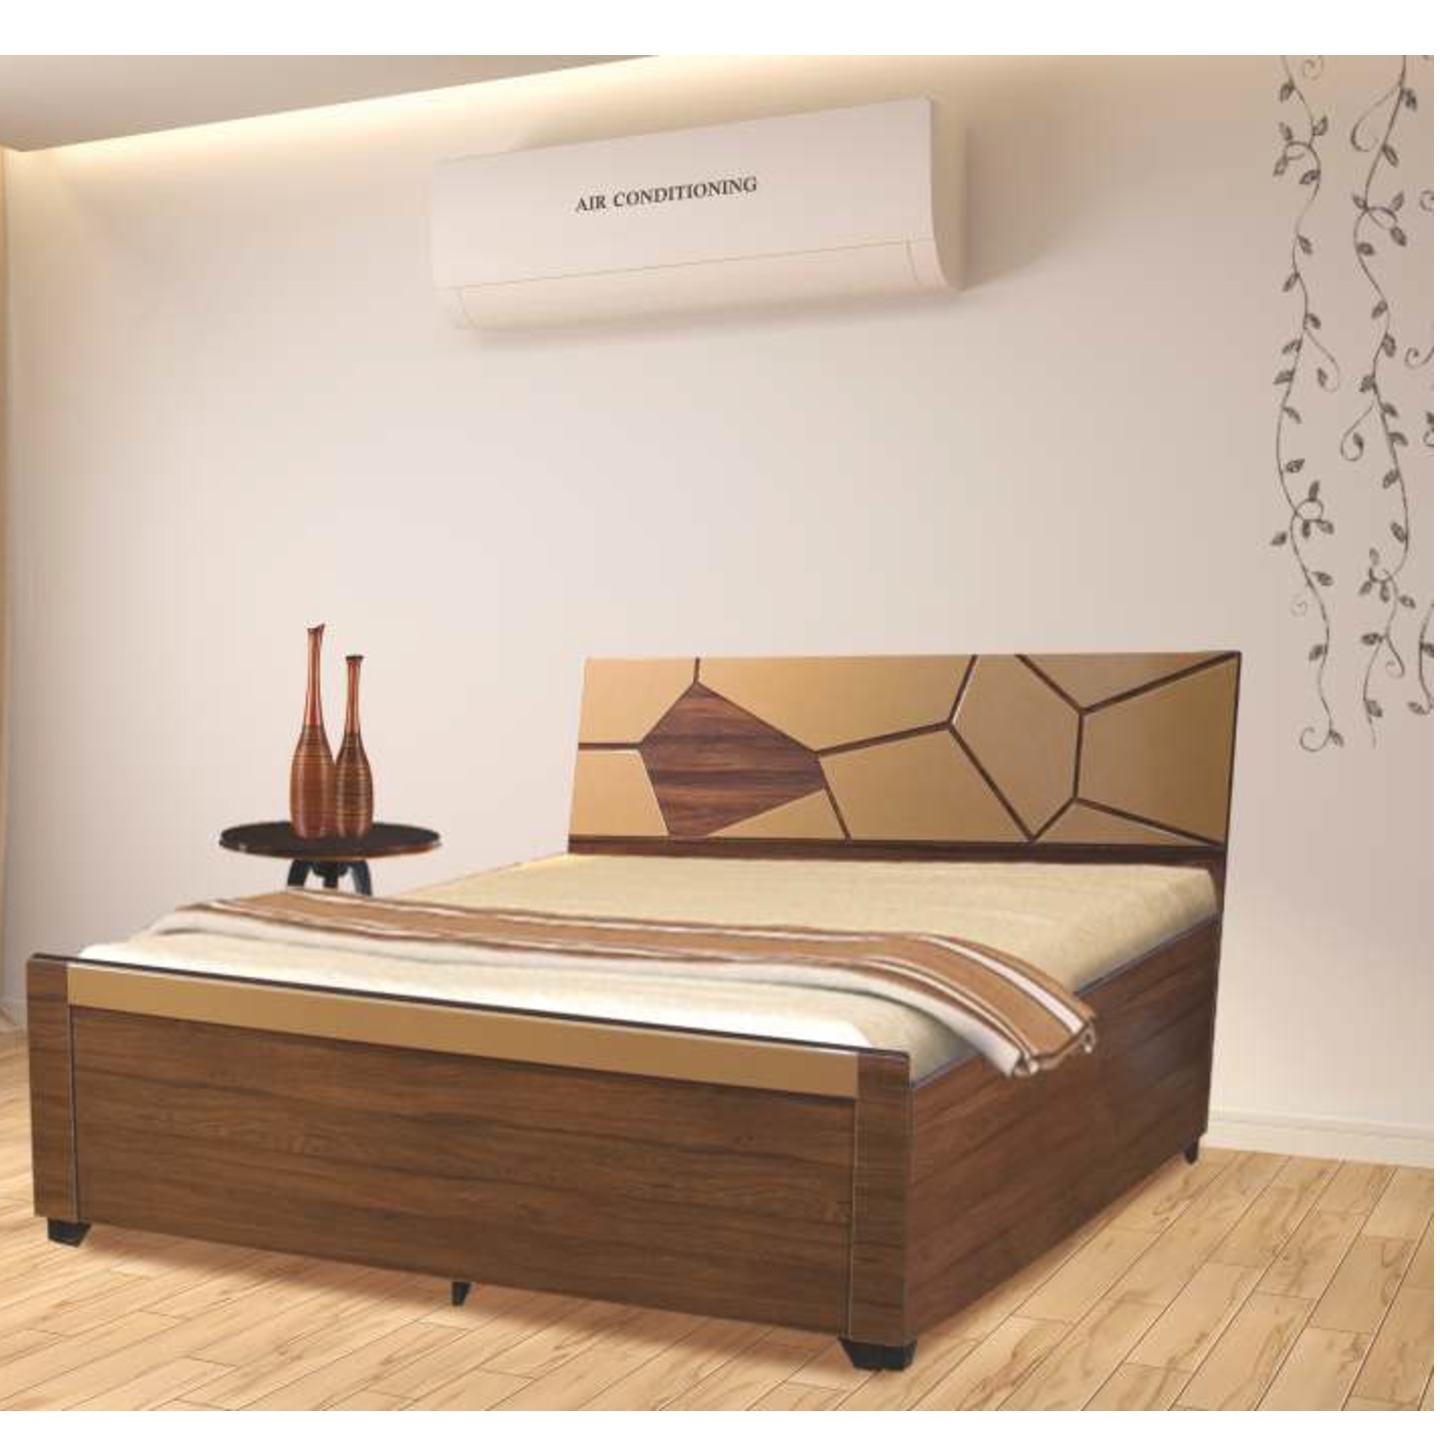 HS Sport Bed Size 72x 60 In Colour Brent Wood Brown